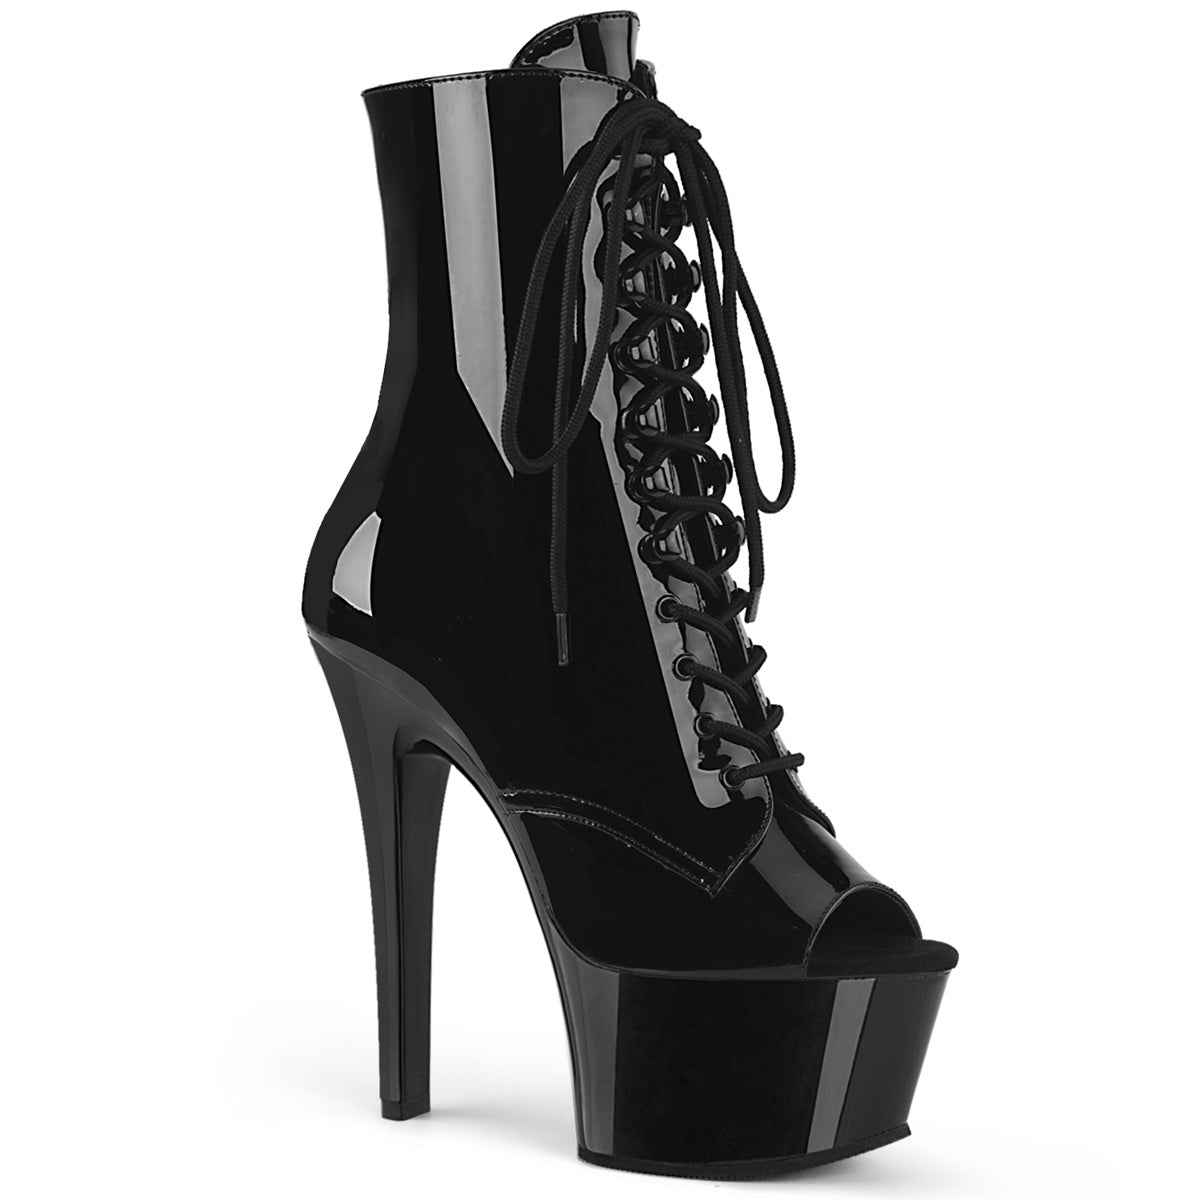 ASPIRE-1021 Pleasers 6" Heel Black Patent Sexy Ankle Boots